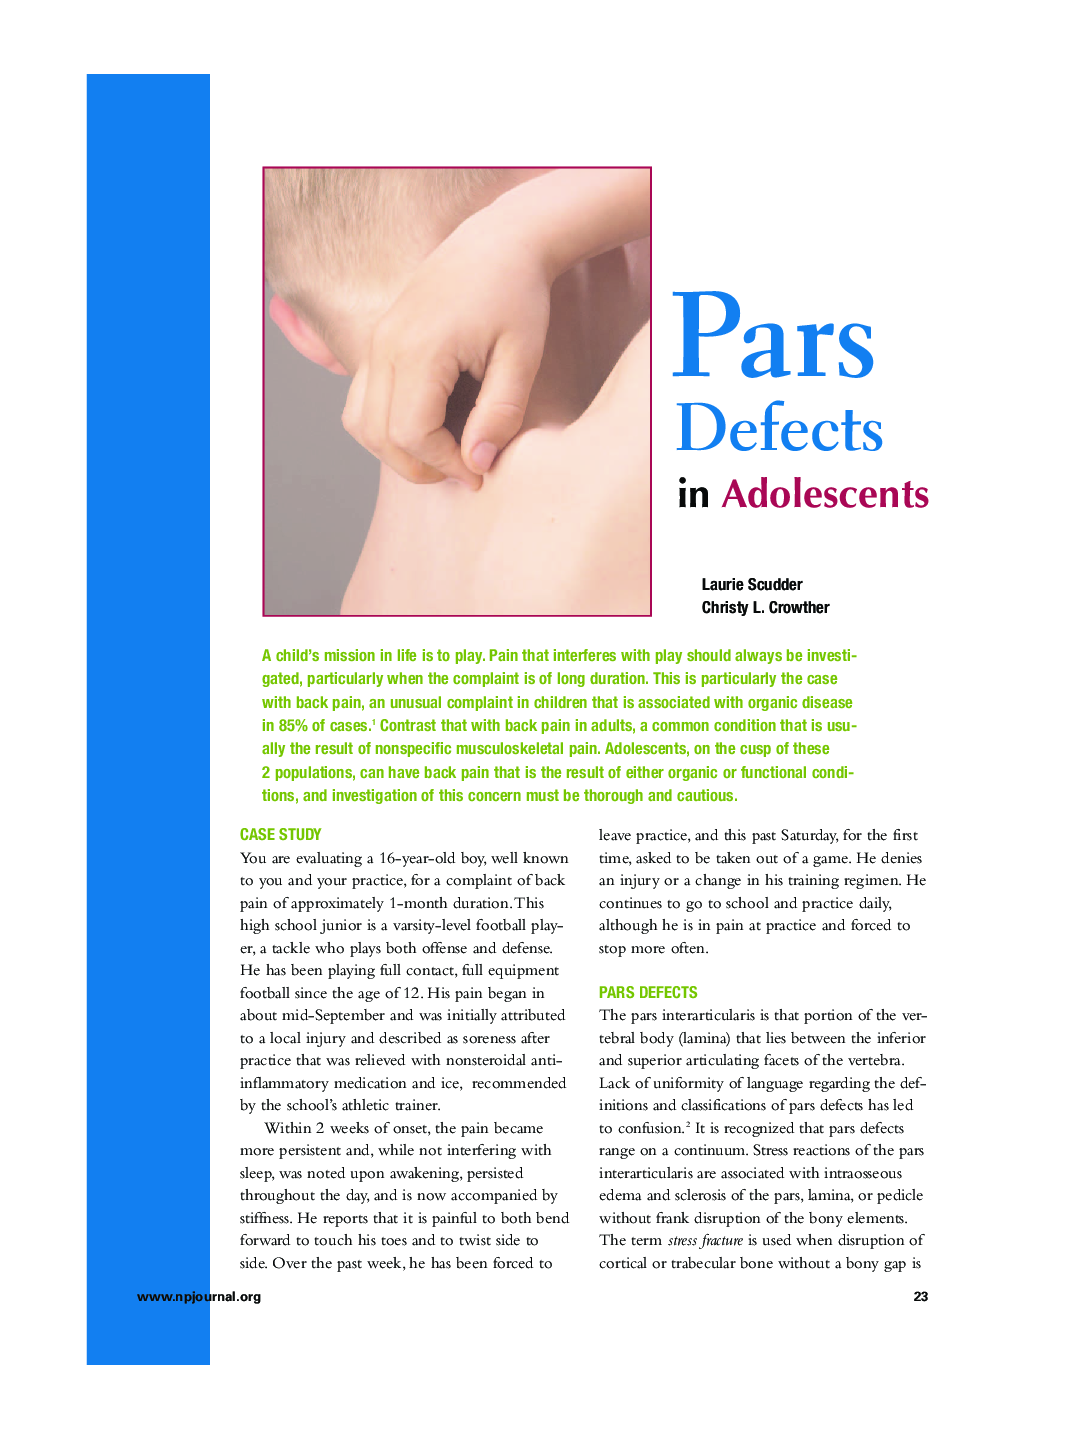 Pars Defects in Adolescents